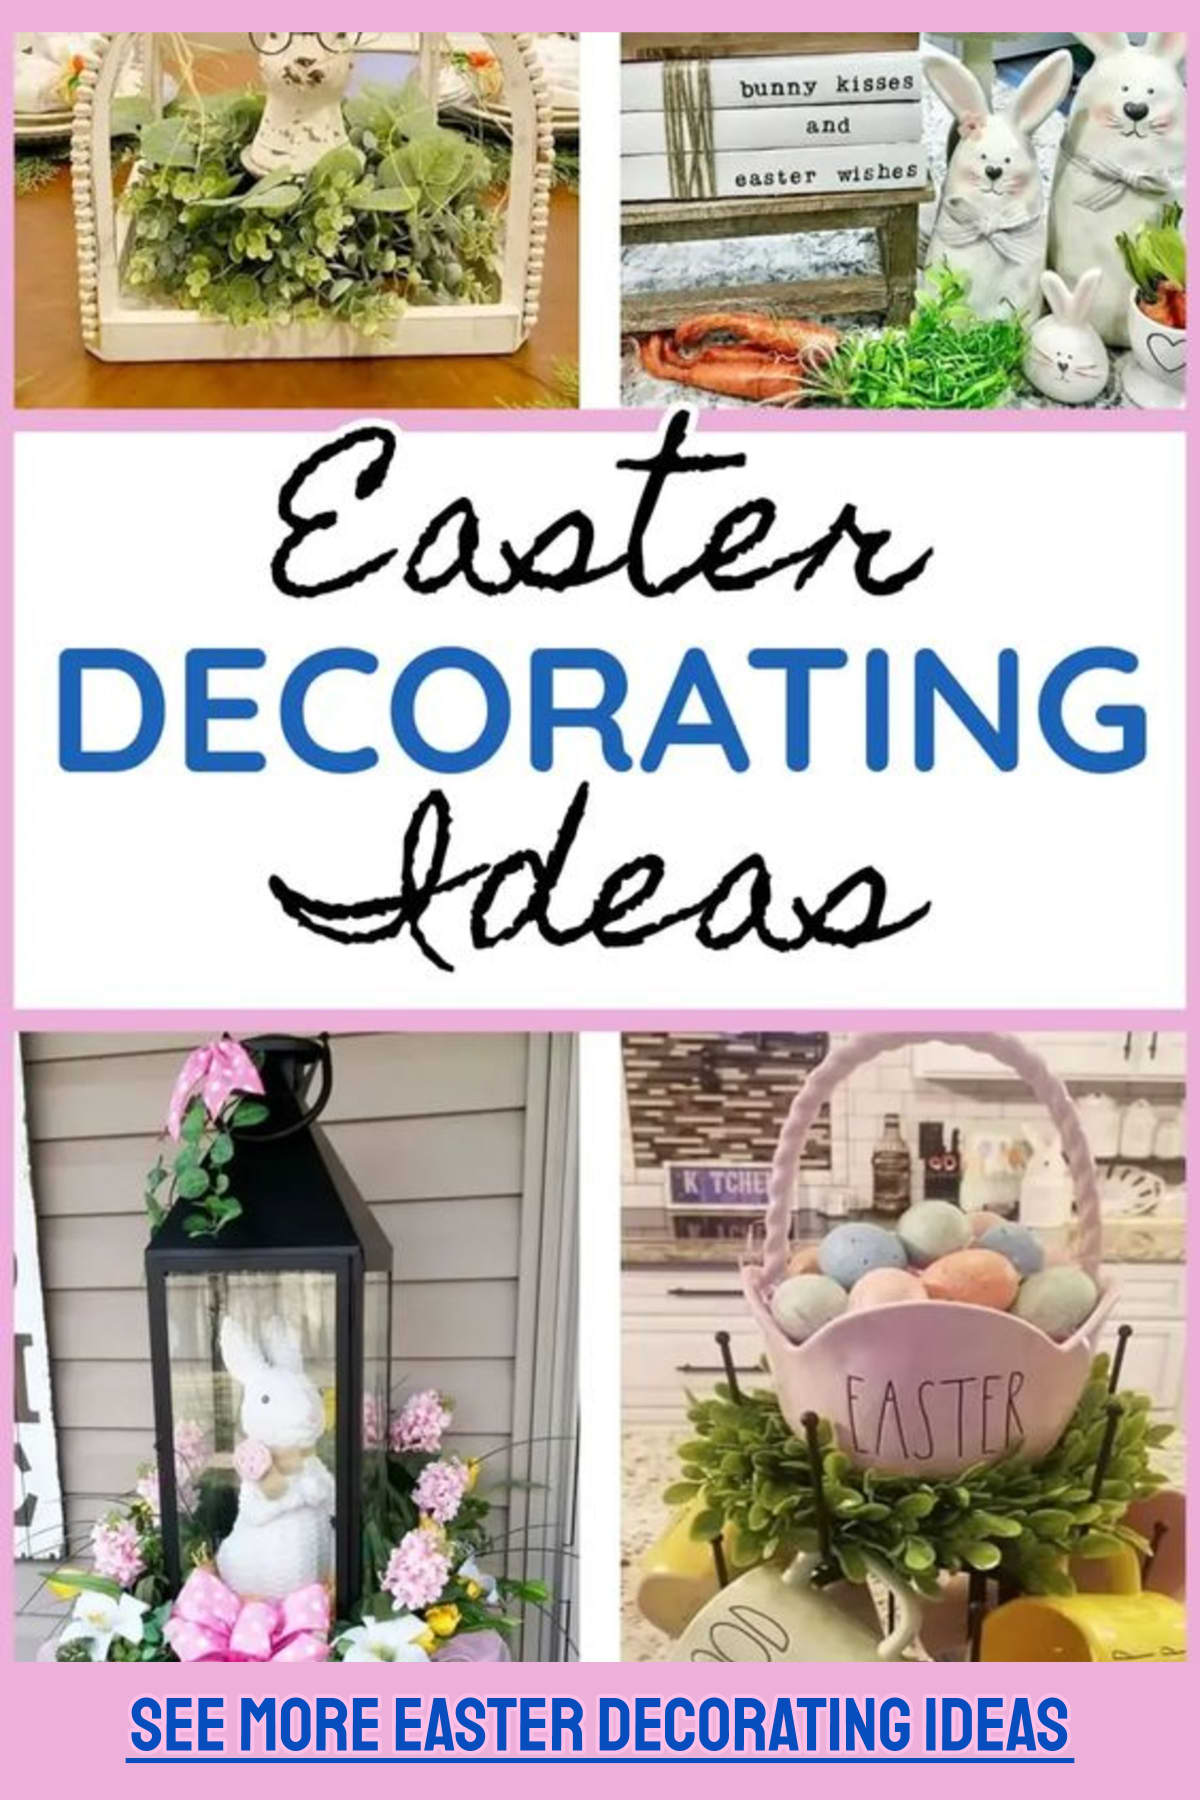 Easter Decorating, Baskets and Outdoor Decor Ideas